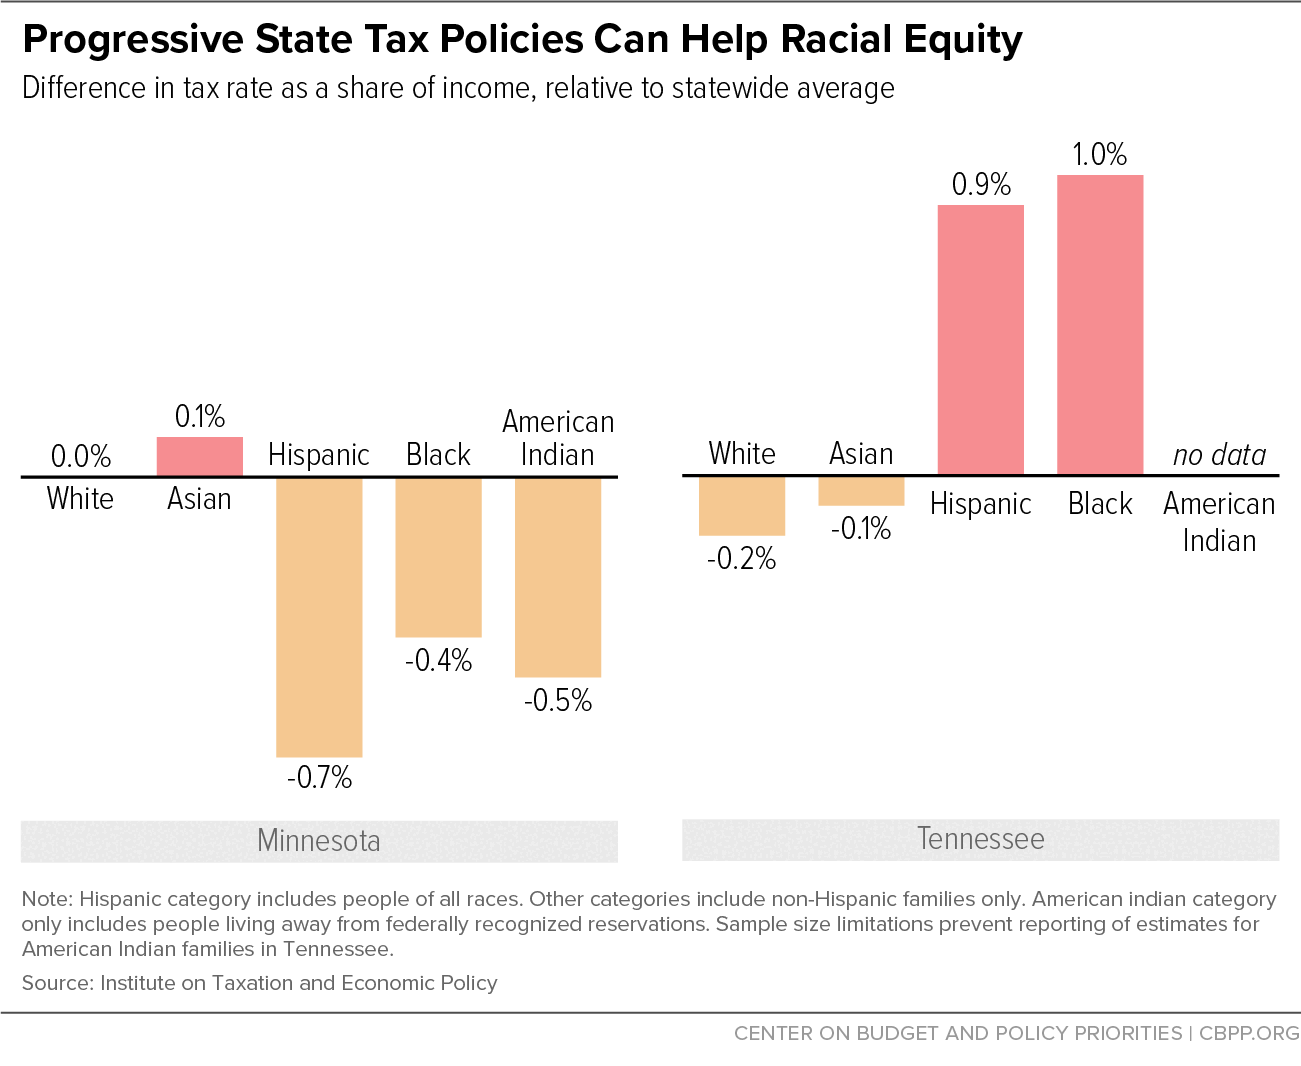 Progressive State Tax Policies Can Help Racial Equity